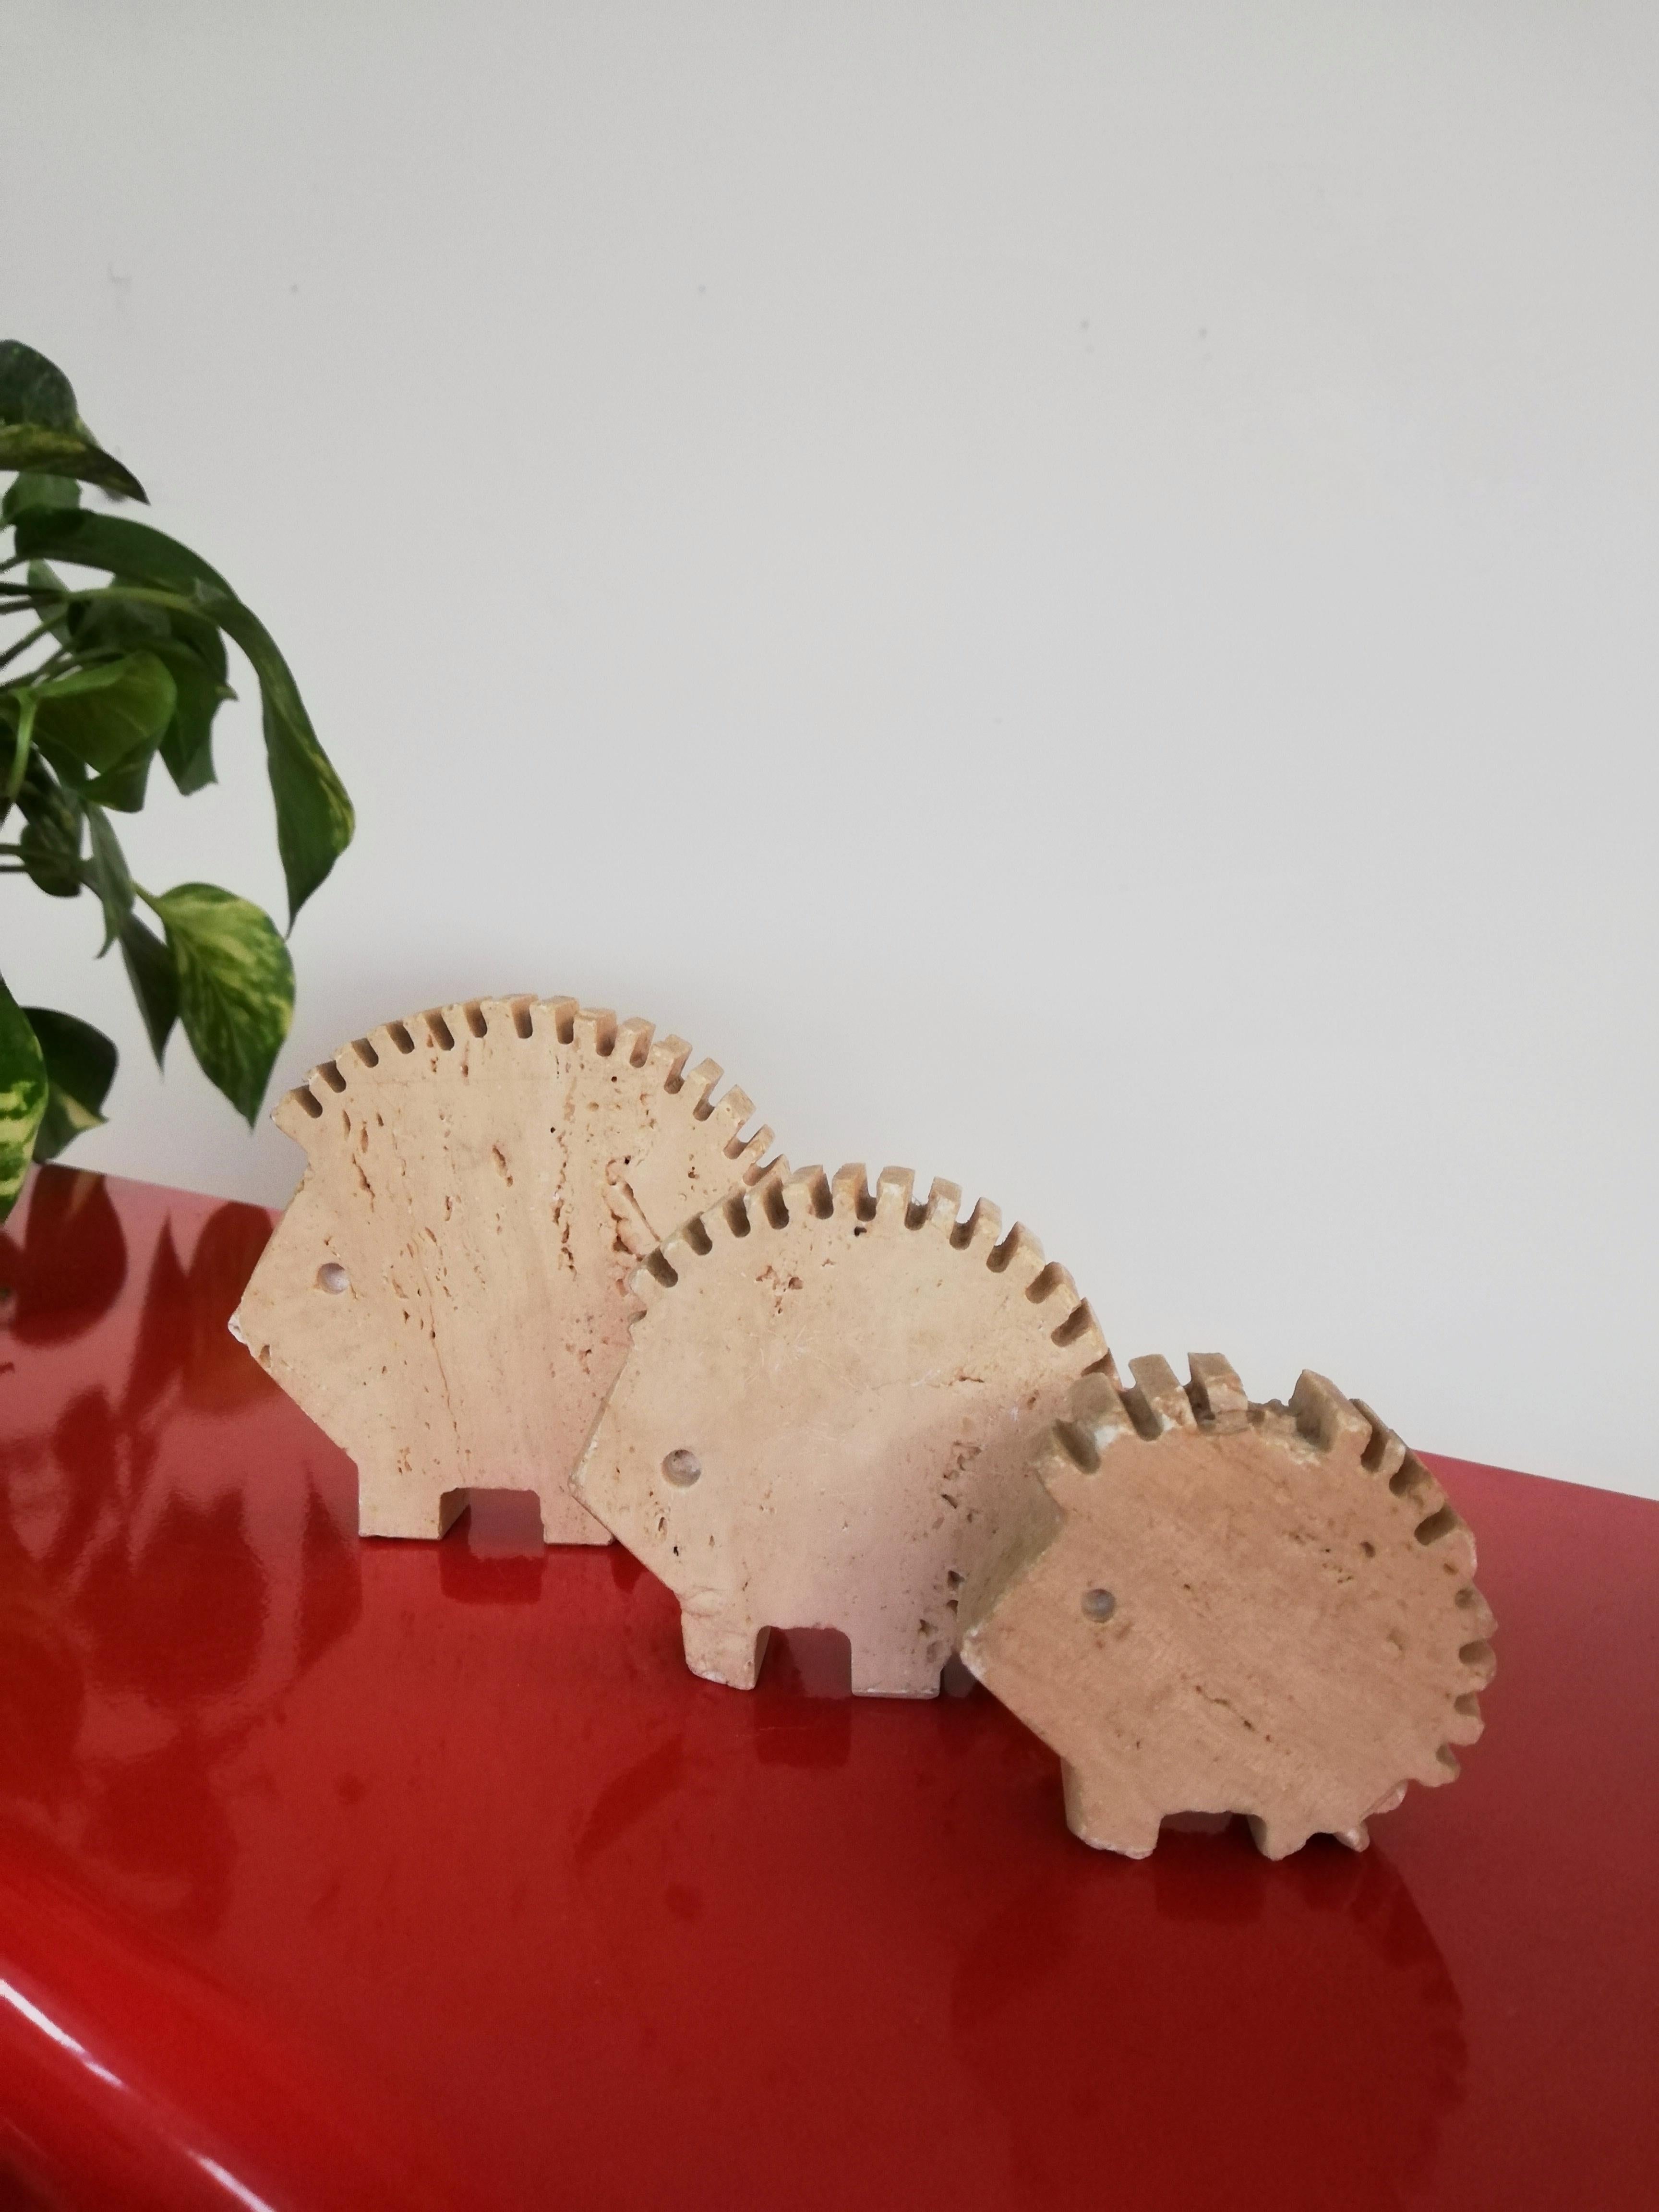 Trio of decorative and collectible sculptures as well as the many travertine animals produced during the 70s by the historic Fratelli Mannelli company.

A family made up of 3 Hedgehogs whose dimensions reduce in scale, of which the largest measures